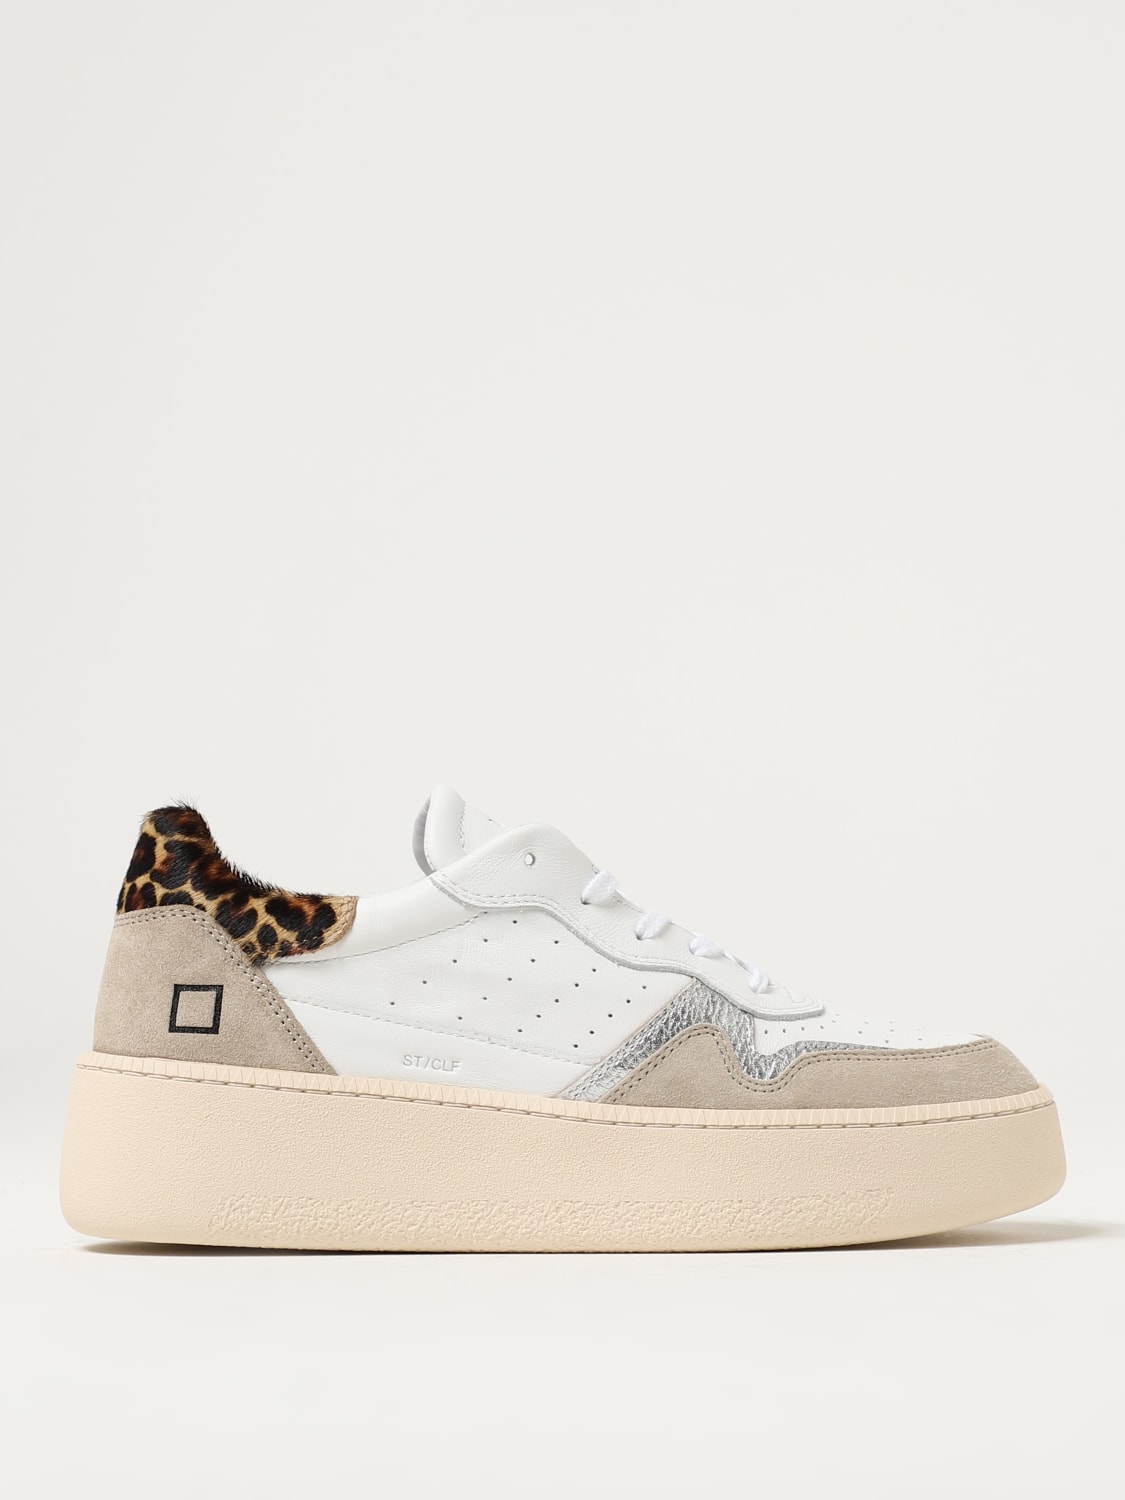 D.A.T.E. SNEAKERS: Sneakers Step in pelle, Sneakers D.a.t.e. donna -  W391STCA Bianco